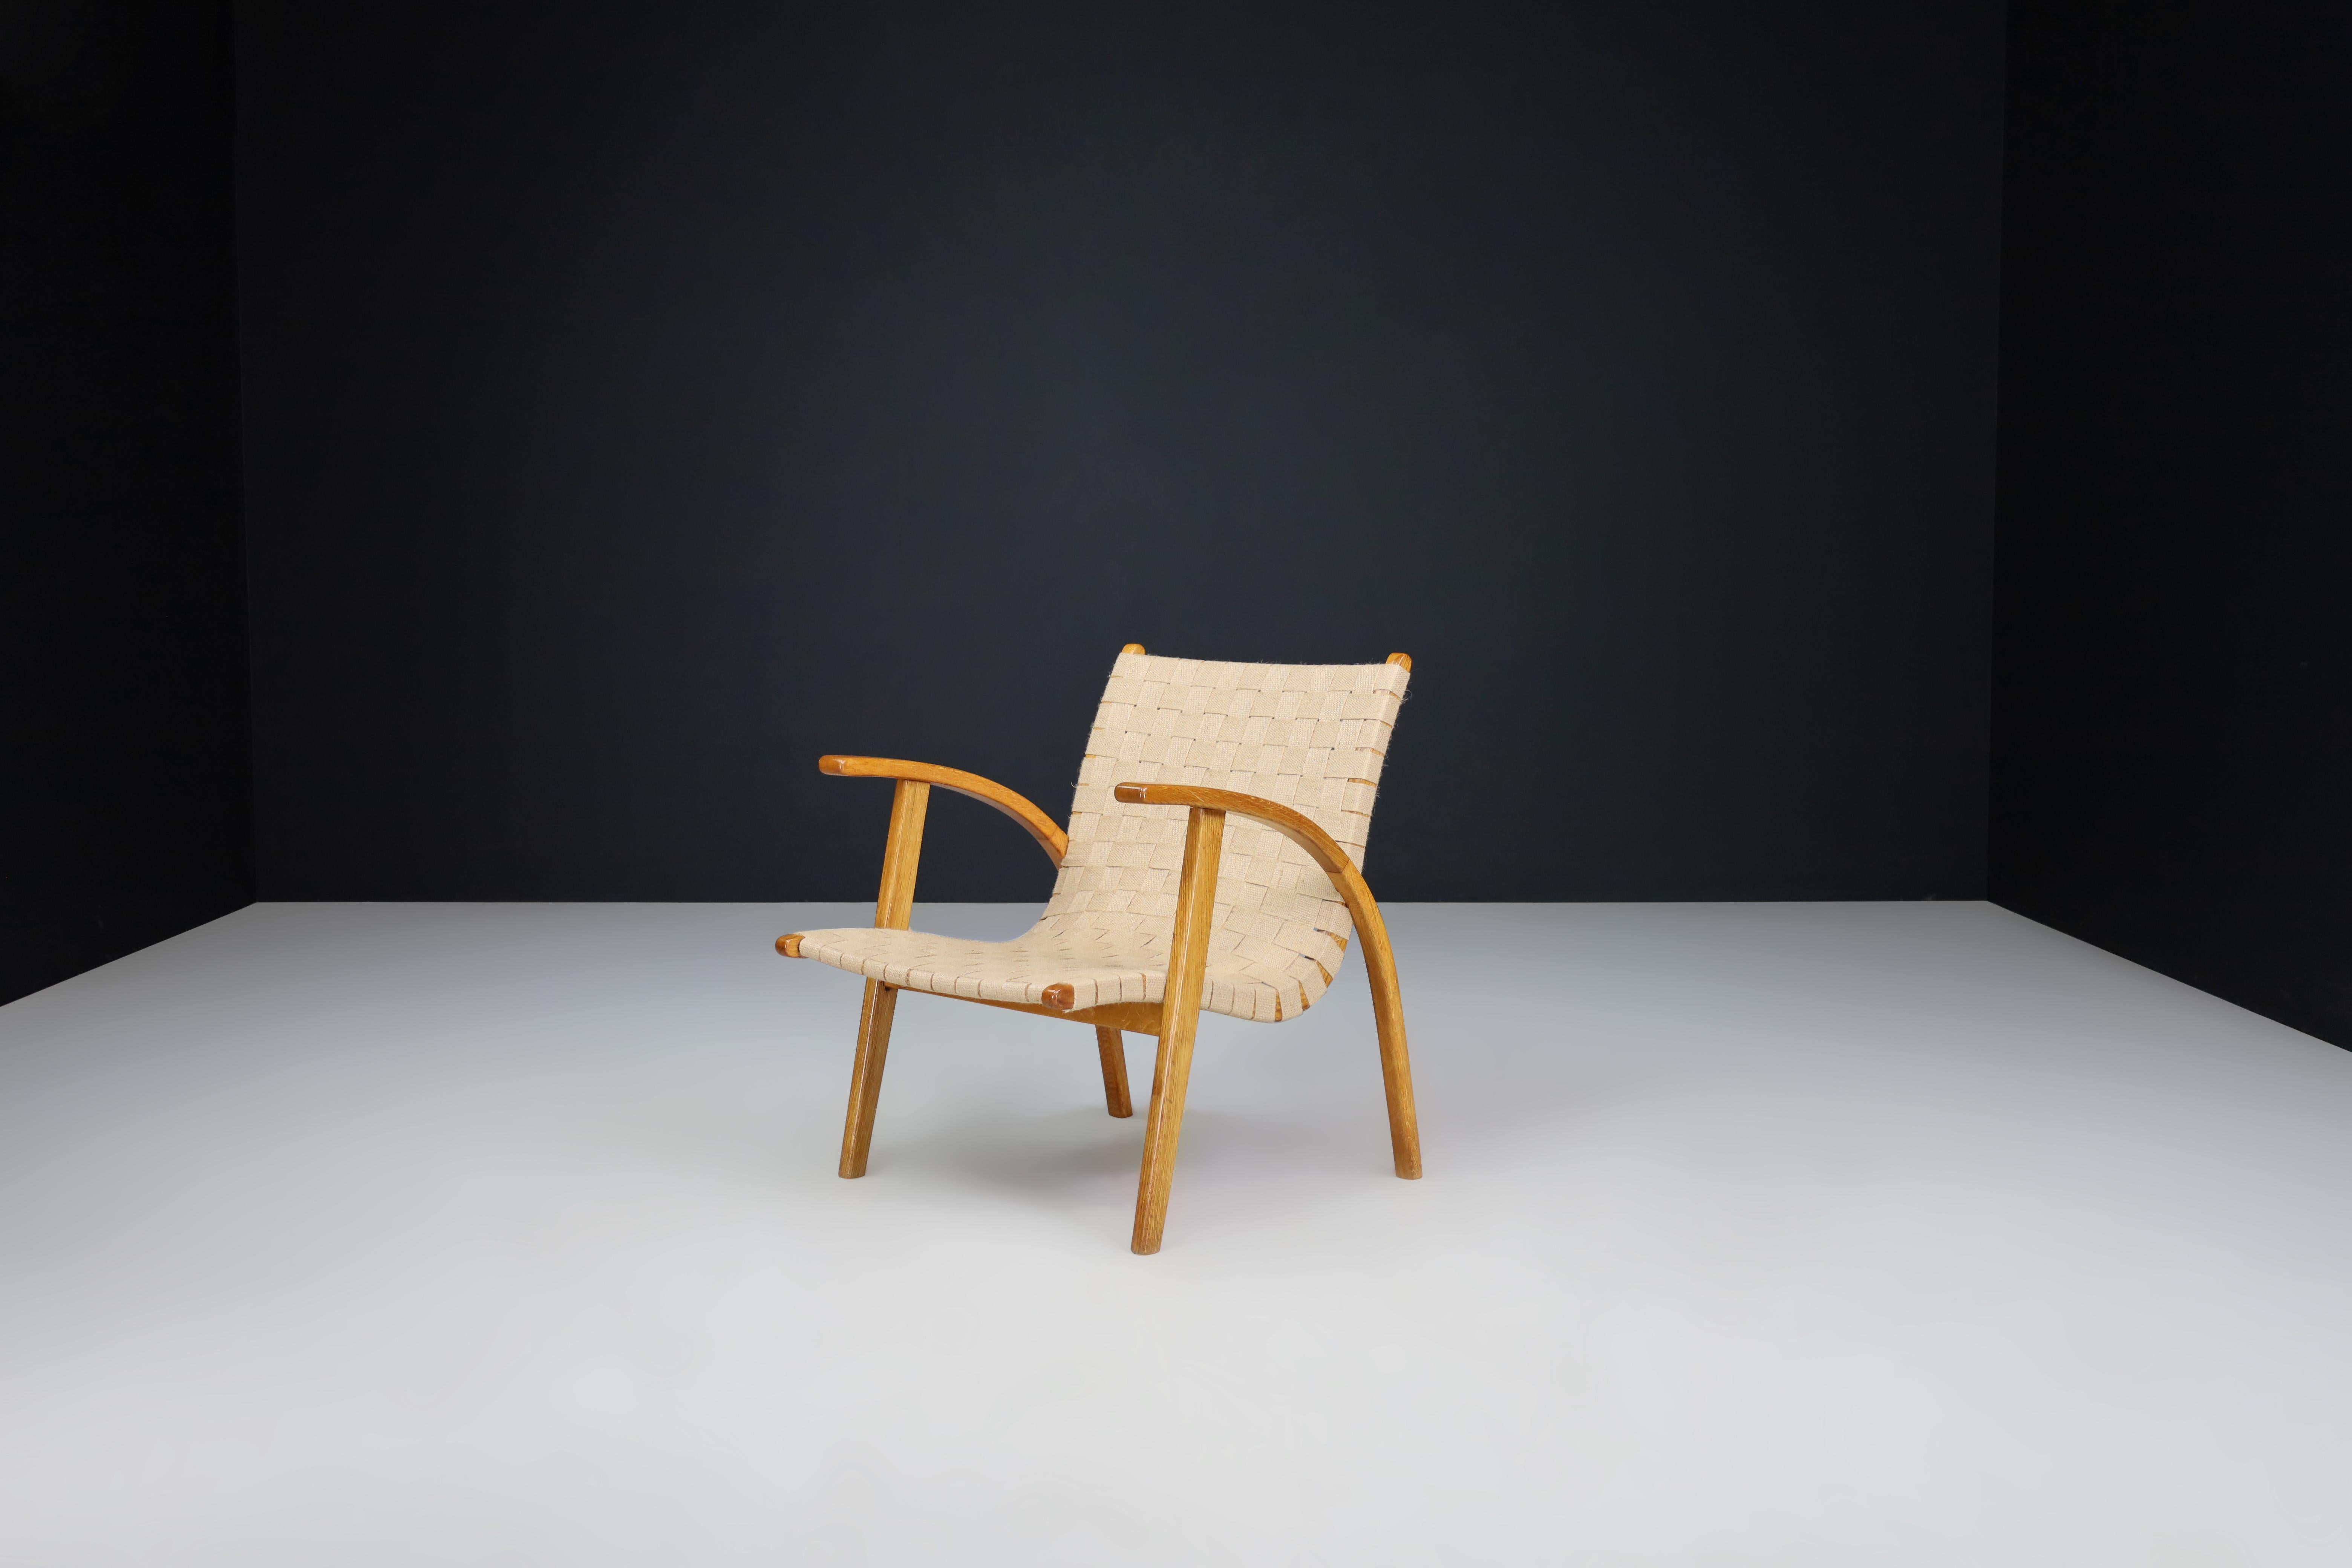 Jan Vanek easy chair in oak bentwood and canvas, Praque, the 1930s

Jan Vanek's easy chair in bentwood and canvas was designed in the 1930s in Prague. Vanek, a Czech architect and contemporary of Jindrich Halabala, created this chair with an elegant